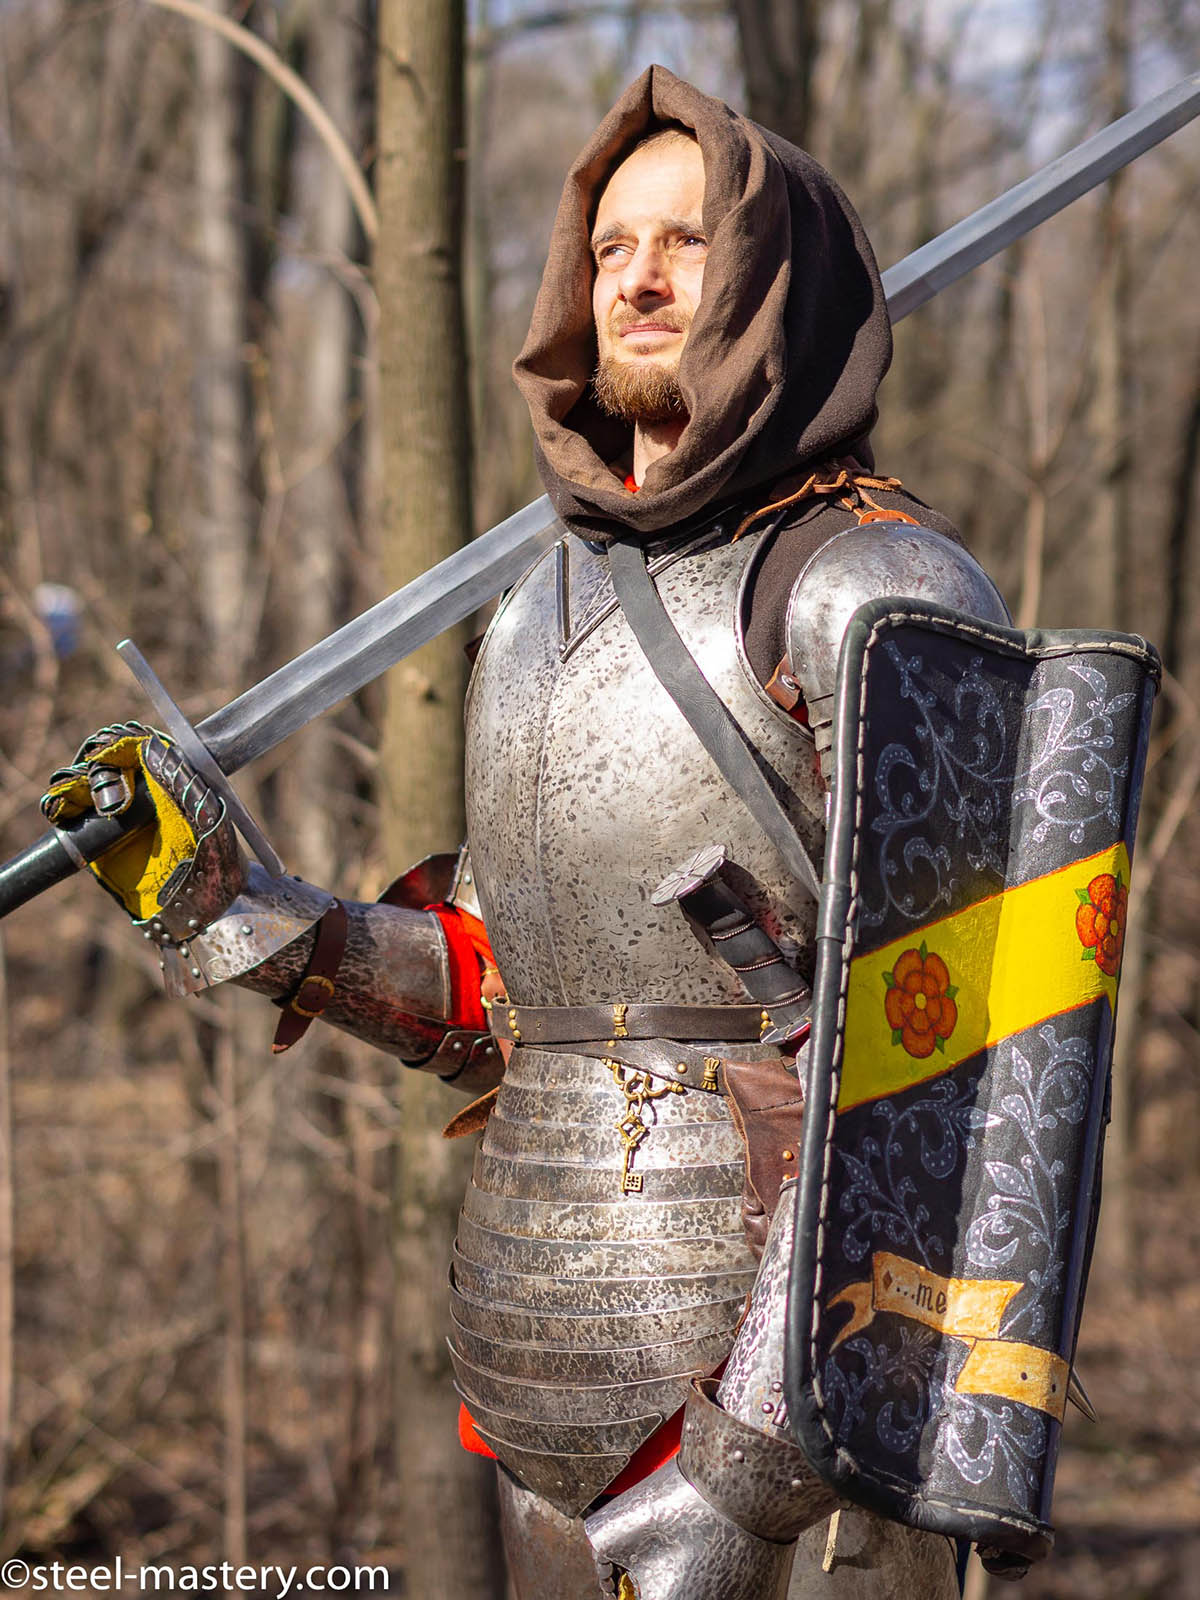 Blackened knight armor kit of the 14th century for sale | Steel Mastery